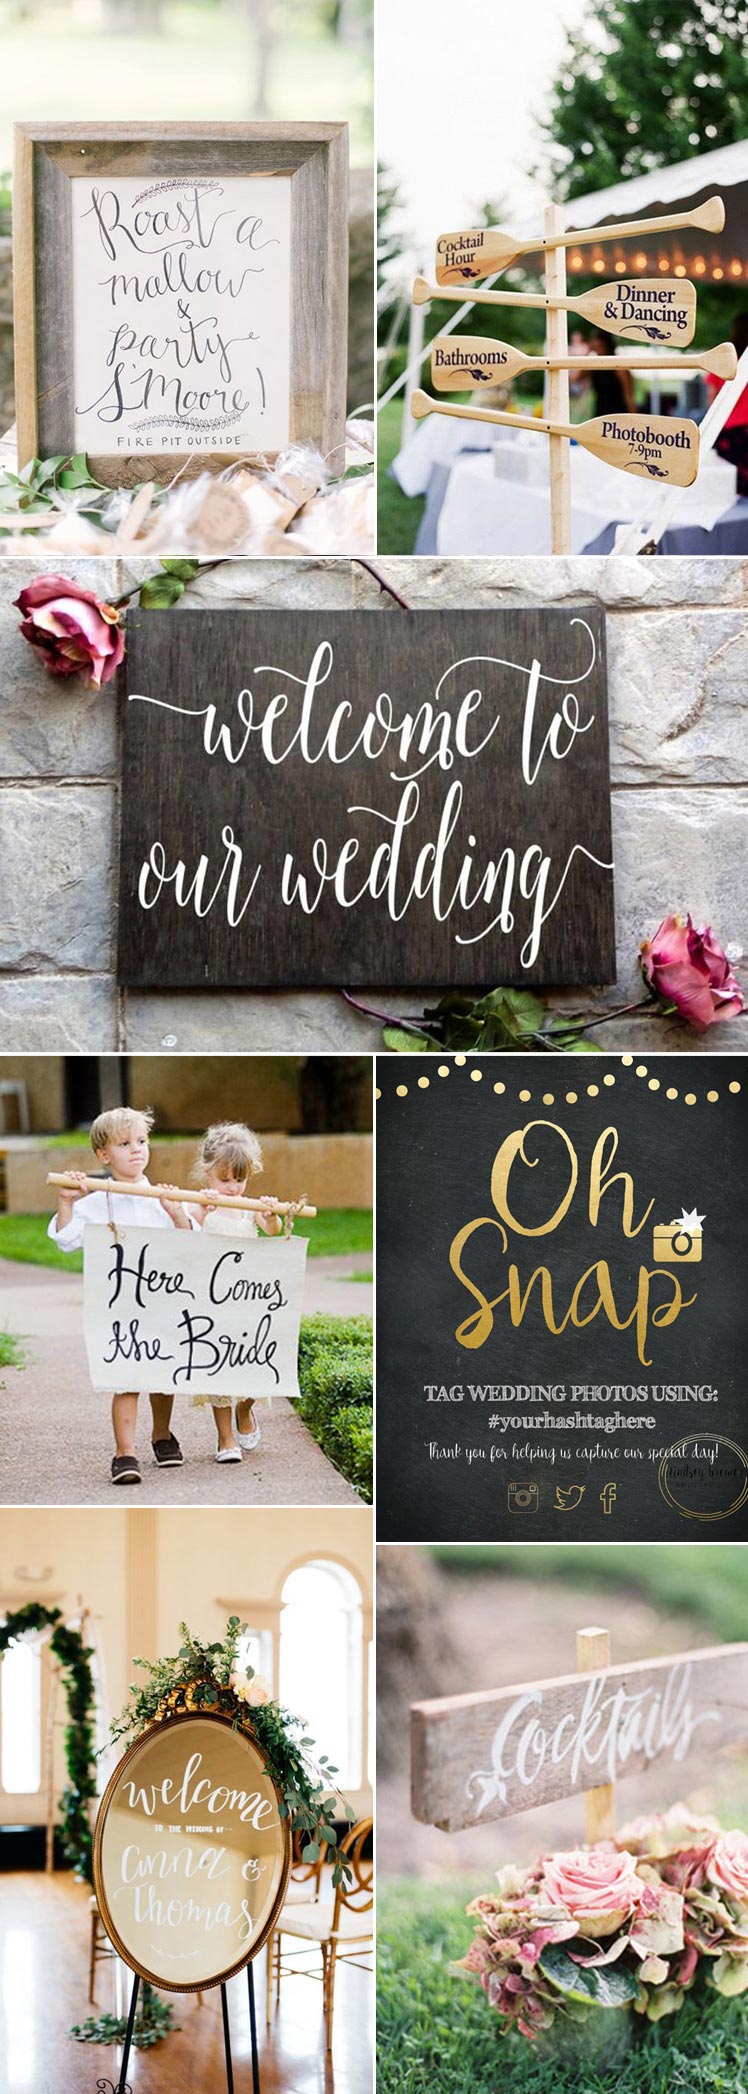 Ideas for your wedding day signage